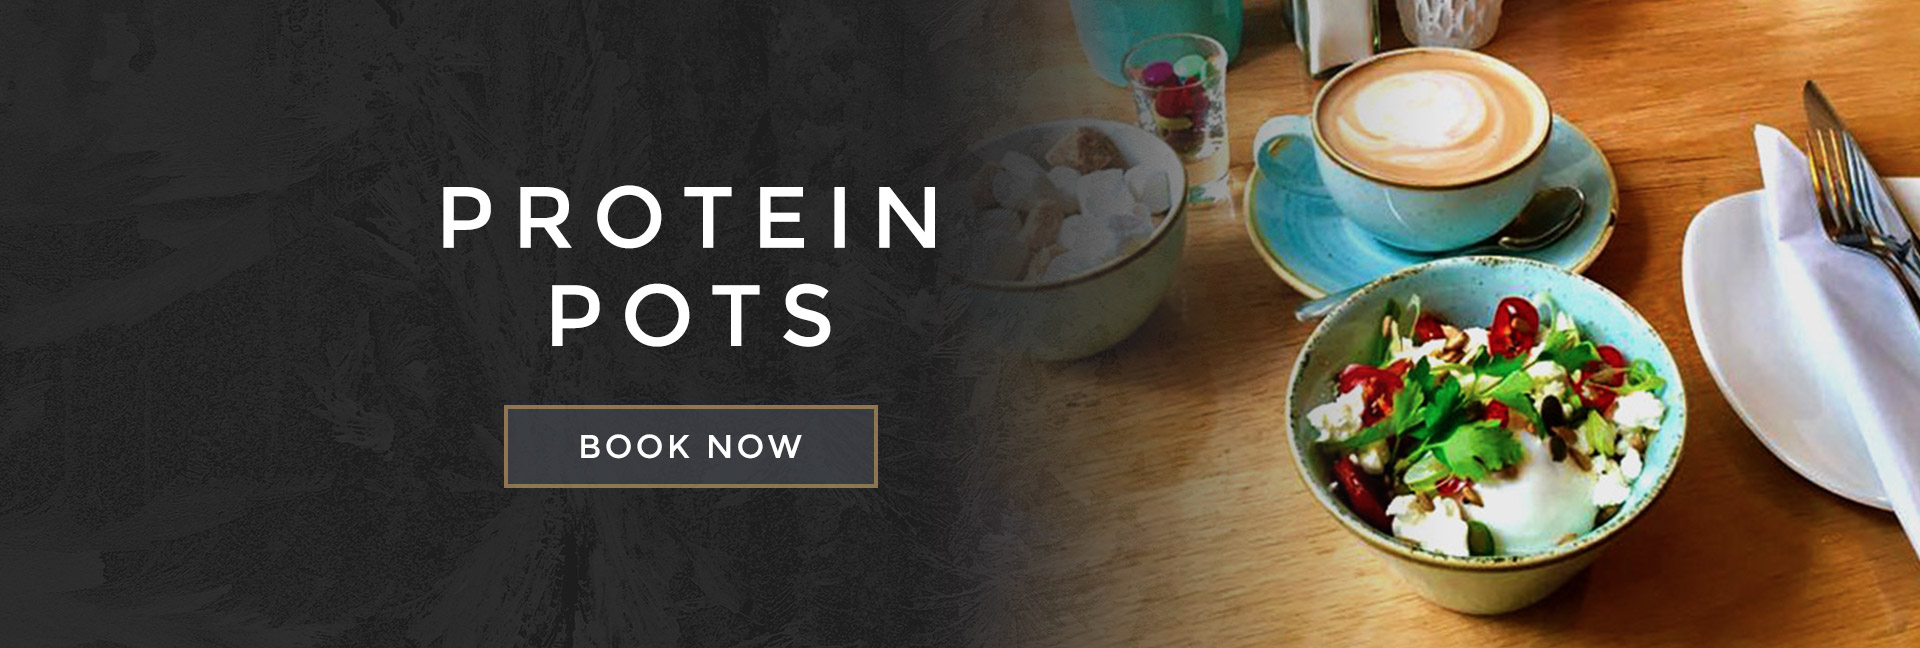 Protein pots at All Bar One Brindleyplace - Book your table